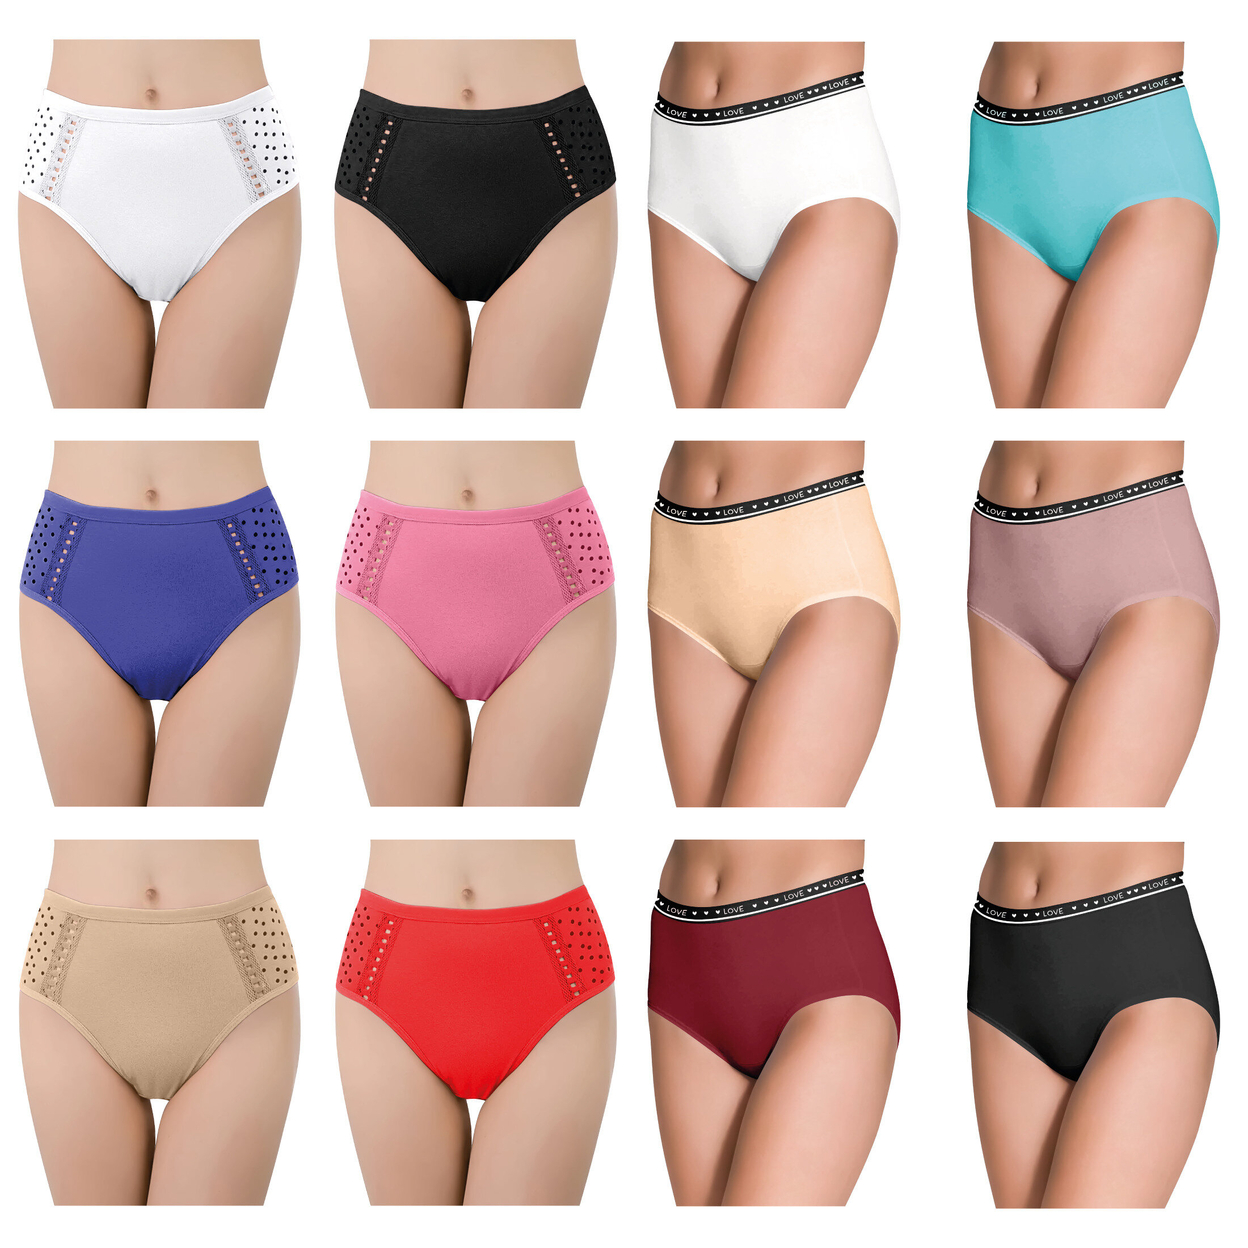 3-Pack: Women's Ultra Soft Moisture Wicking Panties Cotton Perfect Fit Underwear (Plus Sizes Available) - X-large